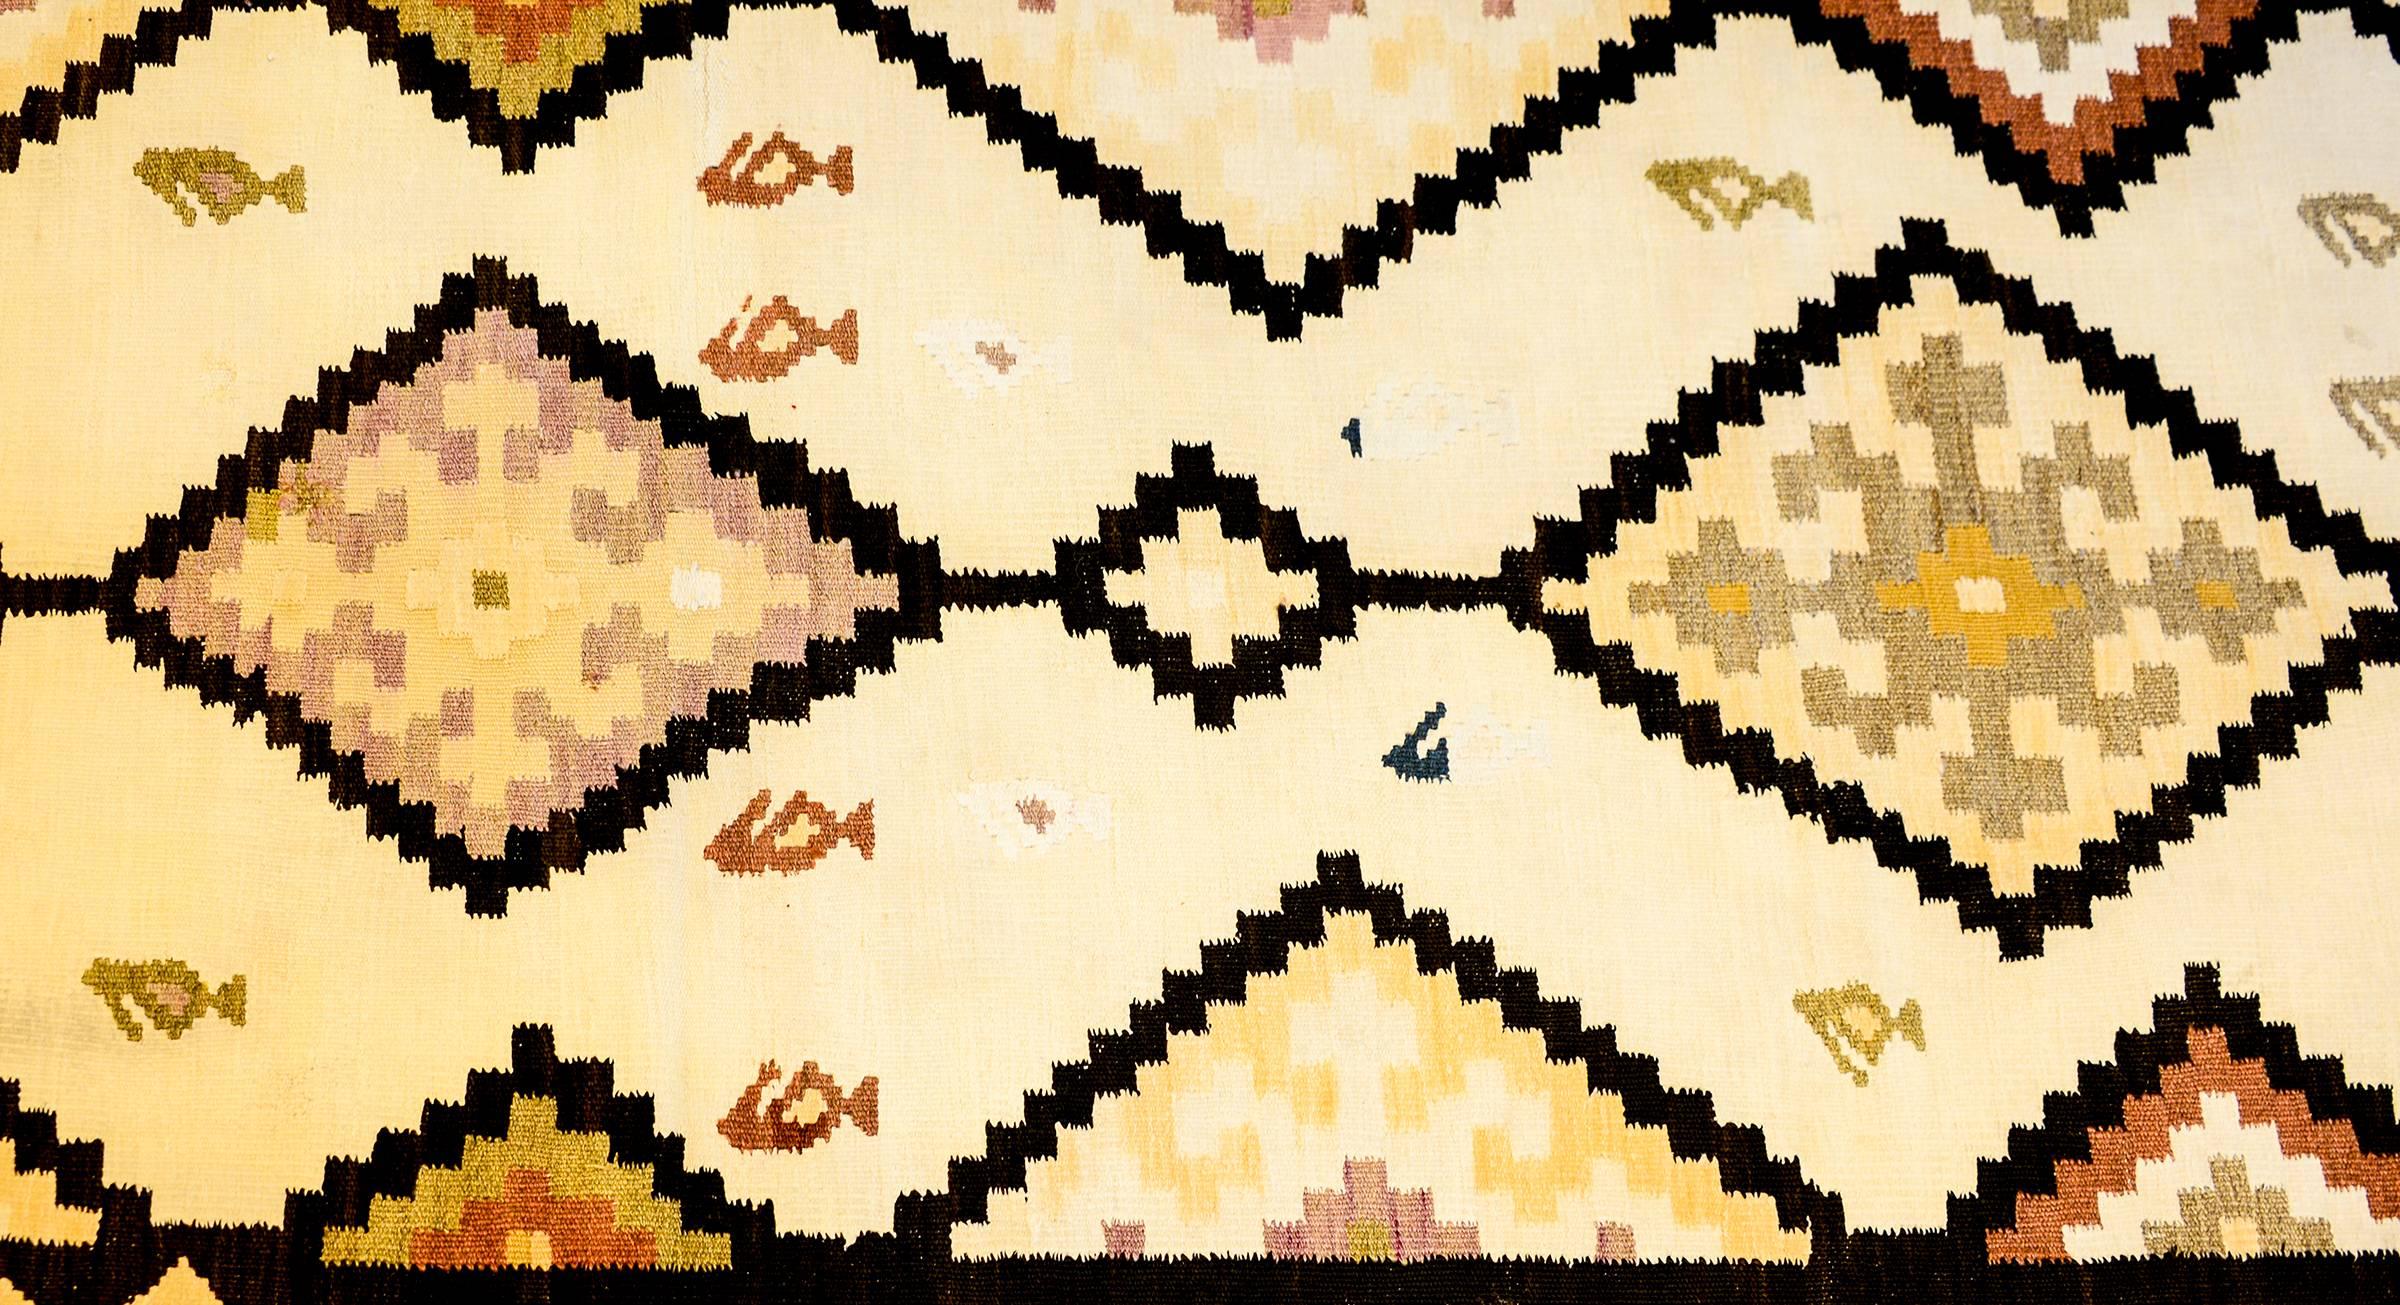 A wonderful early 20th century Persian Kilim runner with a fantastic geometric pattern containing multiple diamond form medallions and triangles, with a beautiful cream colored ground dotted with paisleys. The borer is complementary woven in similar